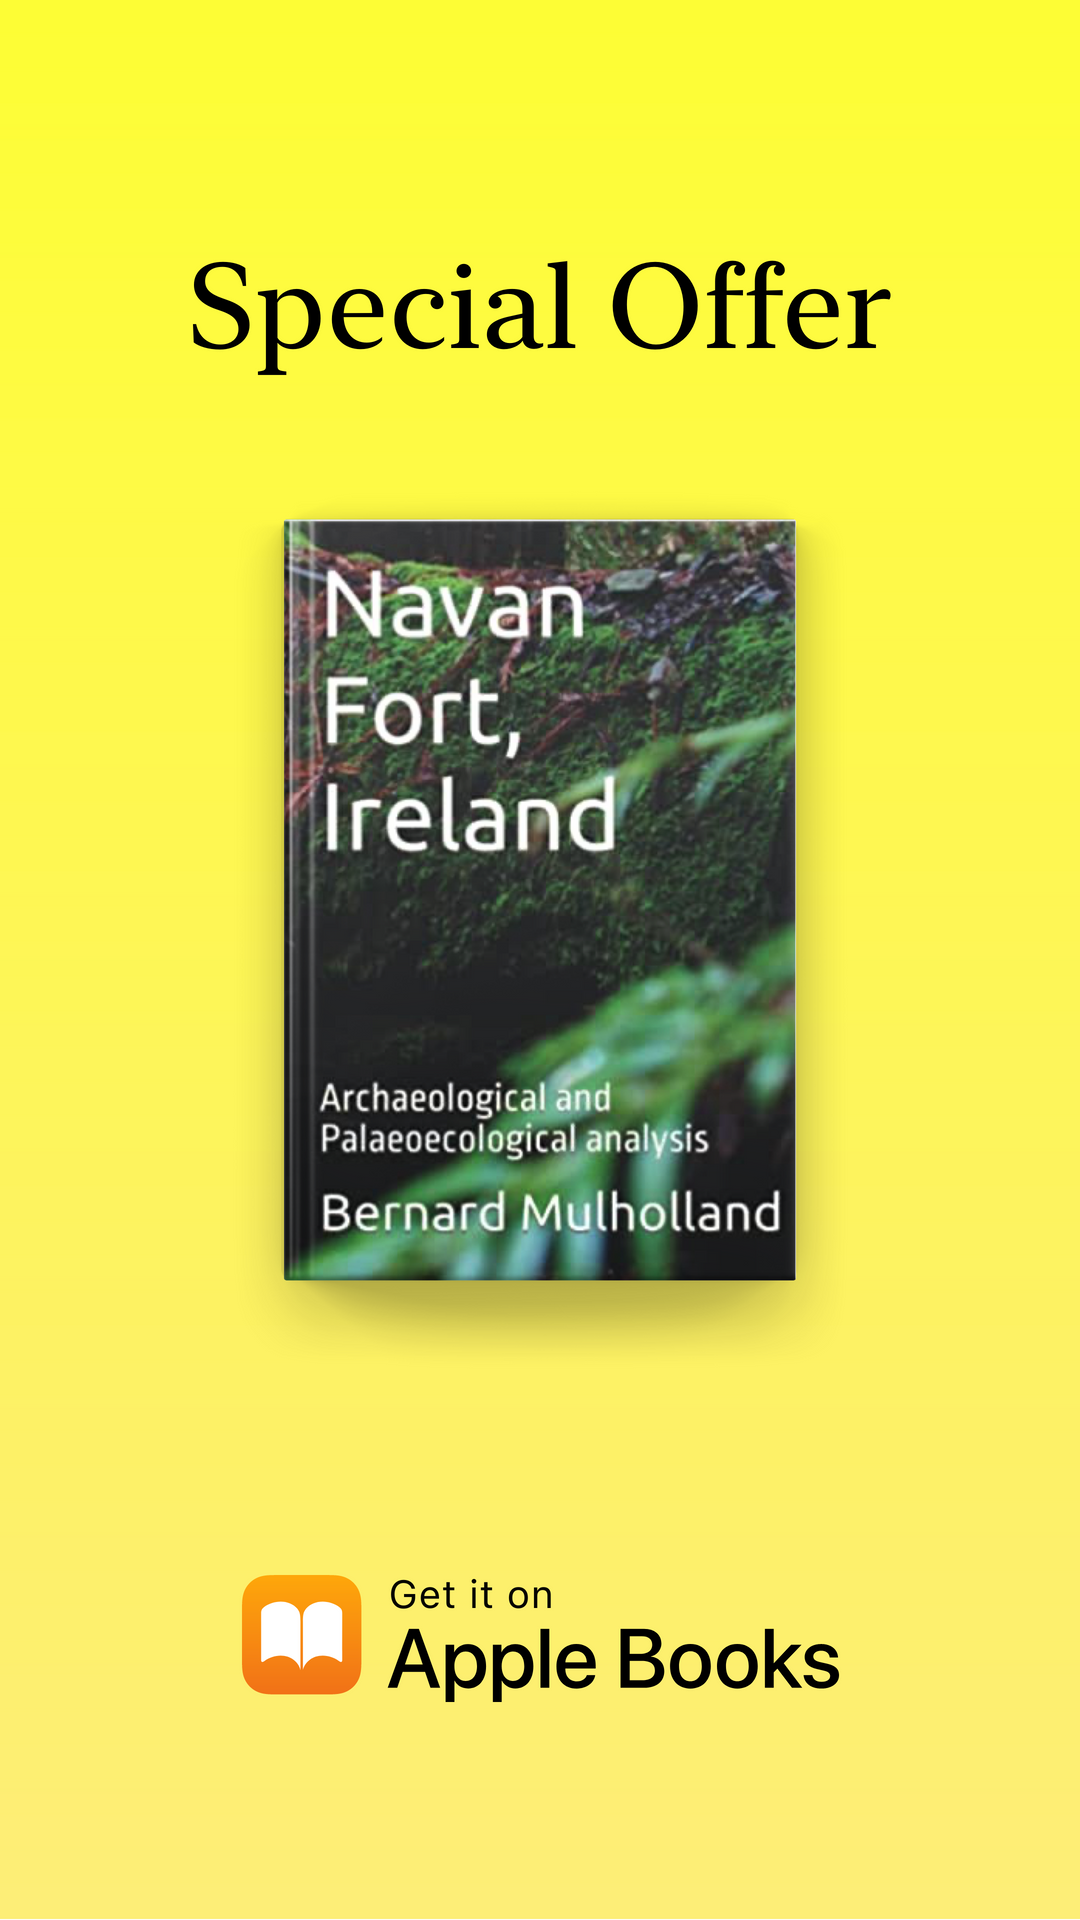 Navan Fort, Ireland: Archaeological and Palaeoecological analysis